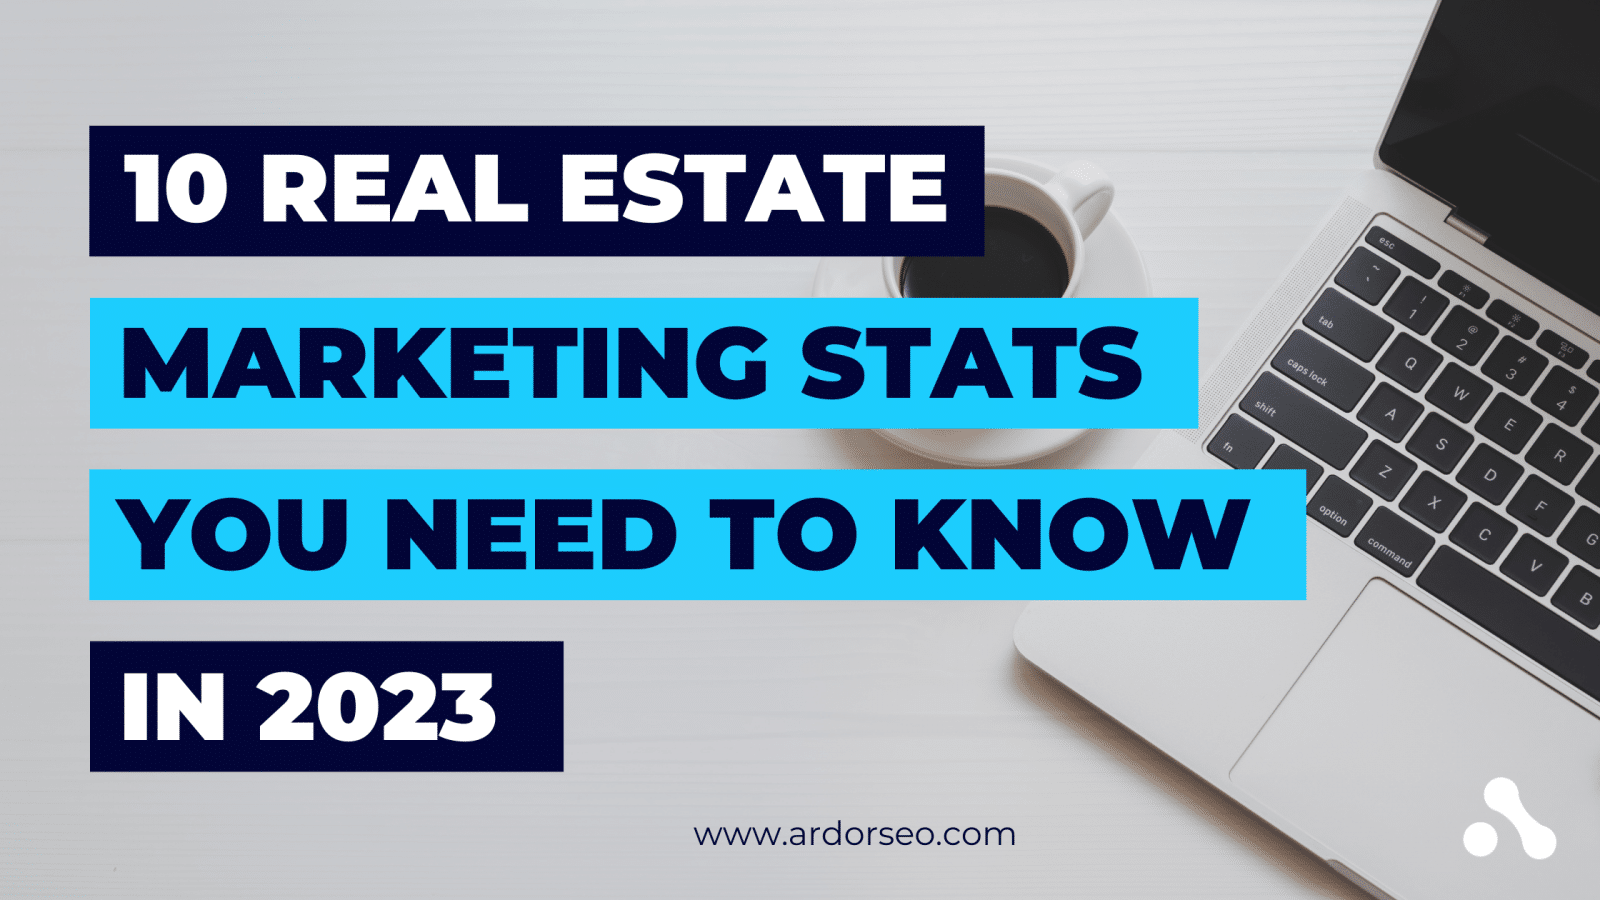 Realtors must understand the latest real estate marketing statistics to thrive within their target area